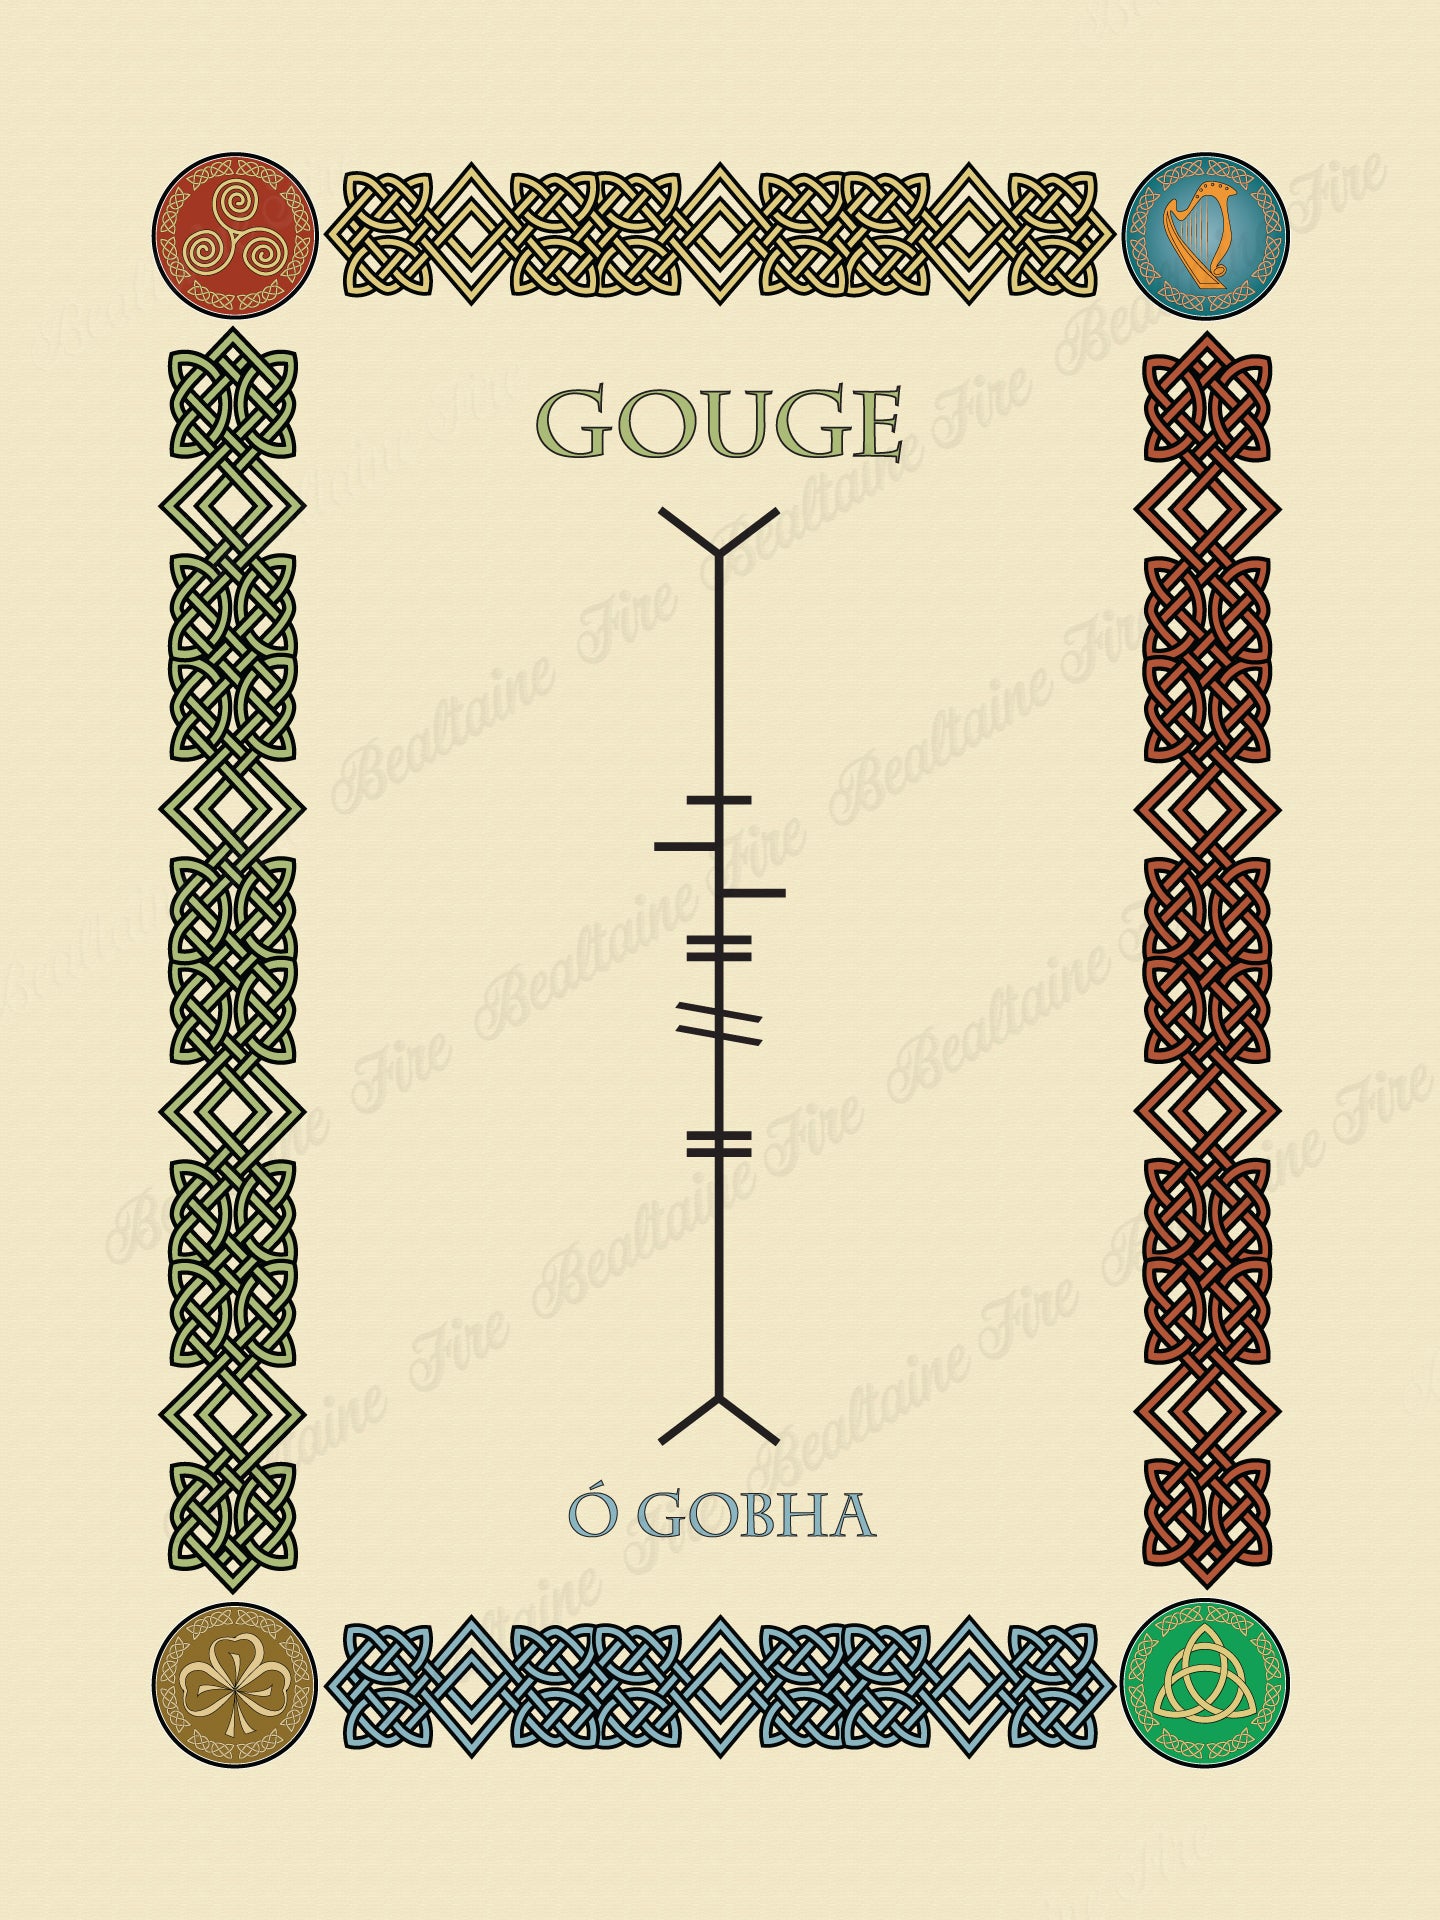 Gouge in Old Irish and Ogham - PDF Download